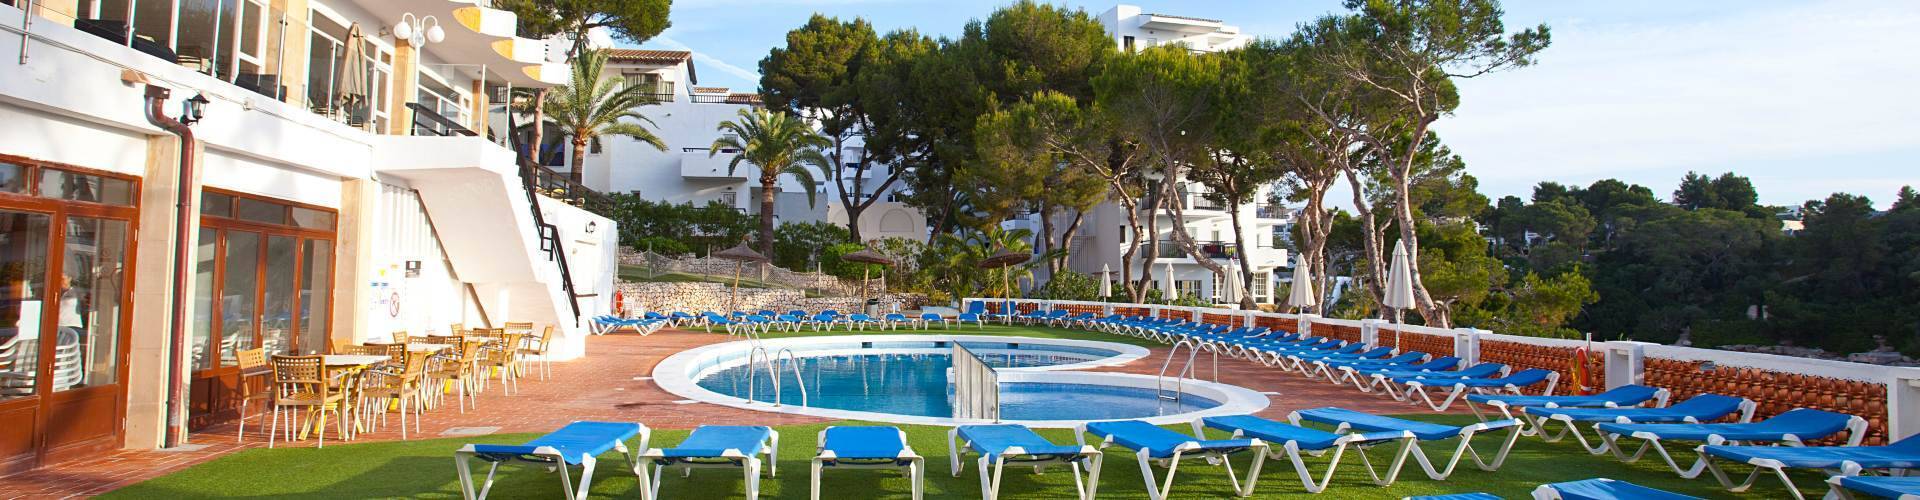 Cabot Hotels - Cala d'Or - 